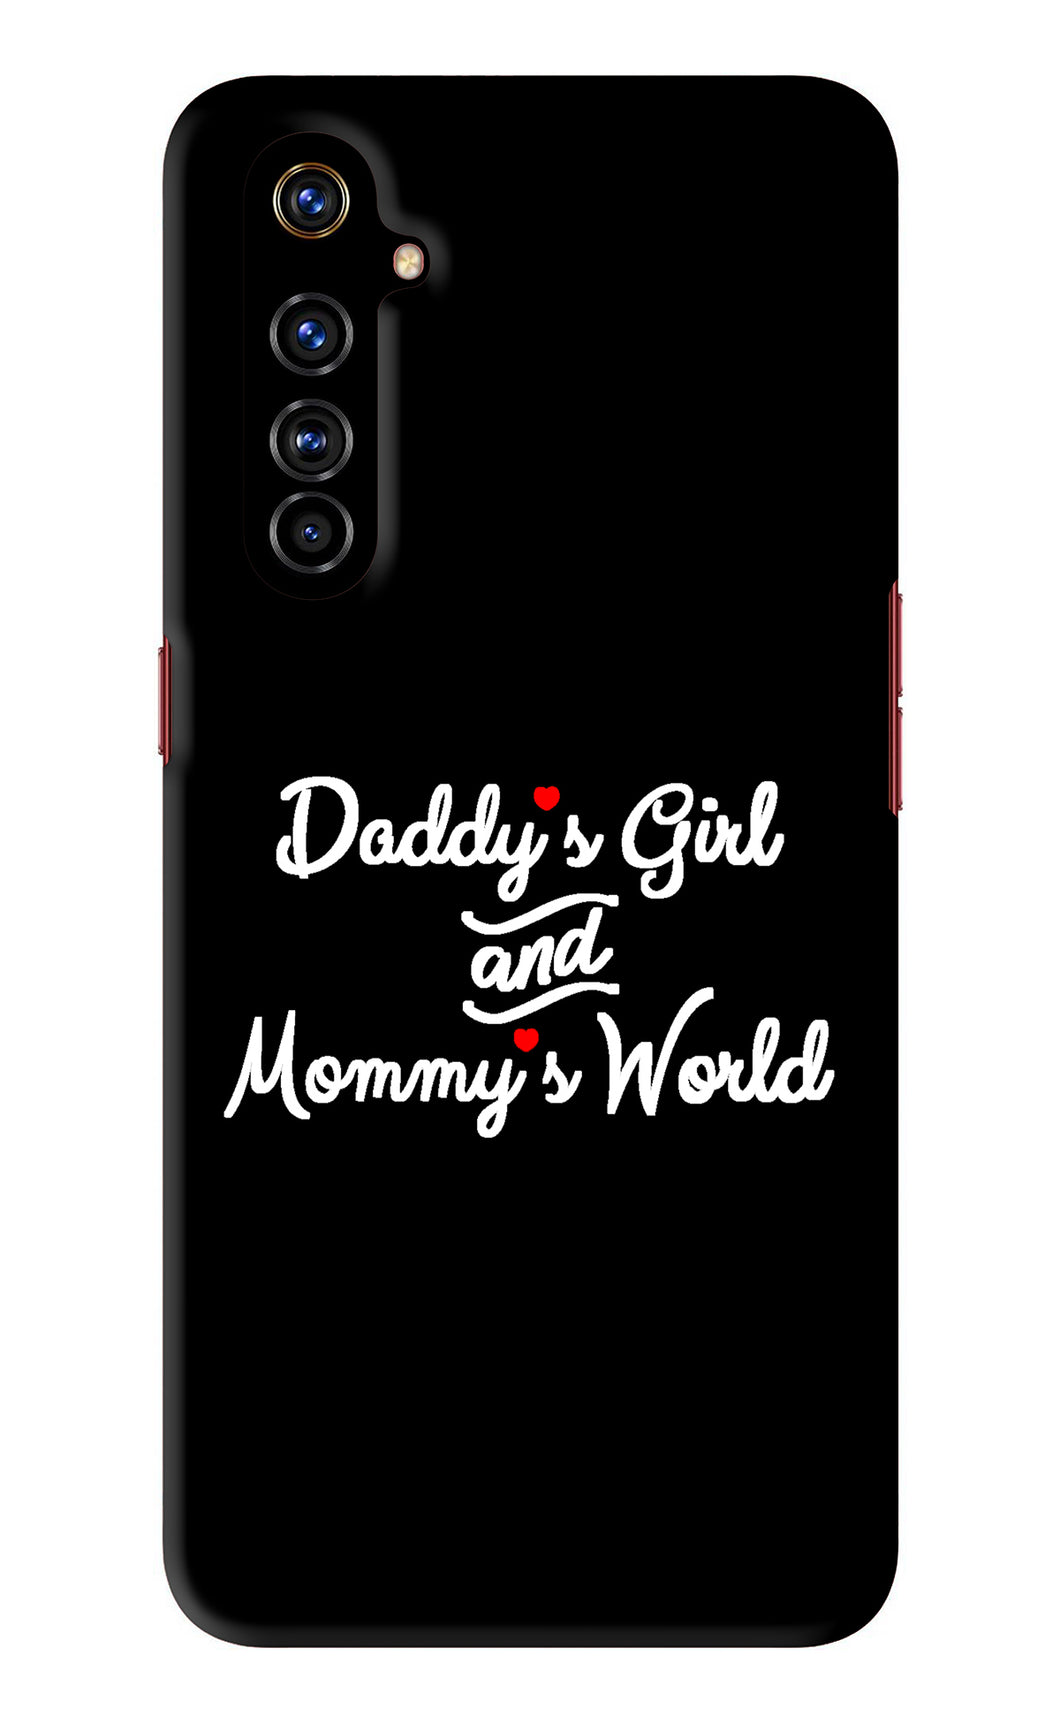 Daddy's Girl and Mommy's World Realme X50 Pro Back Skin Wrap